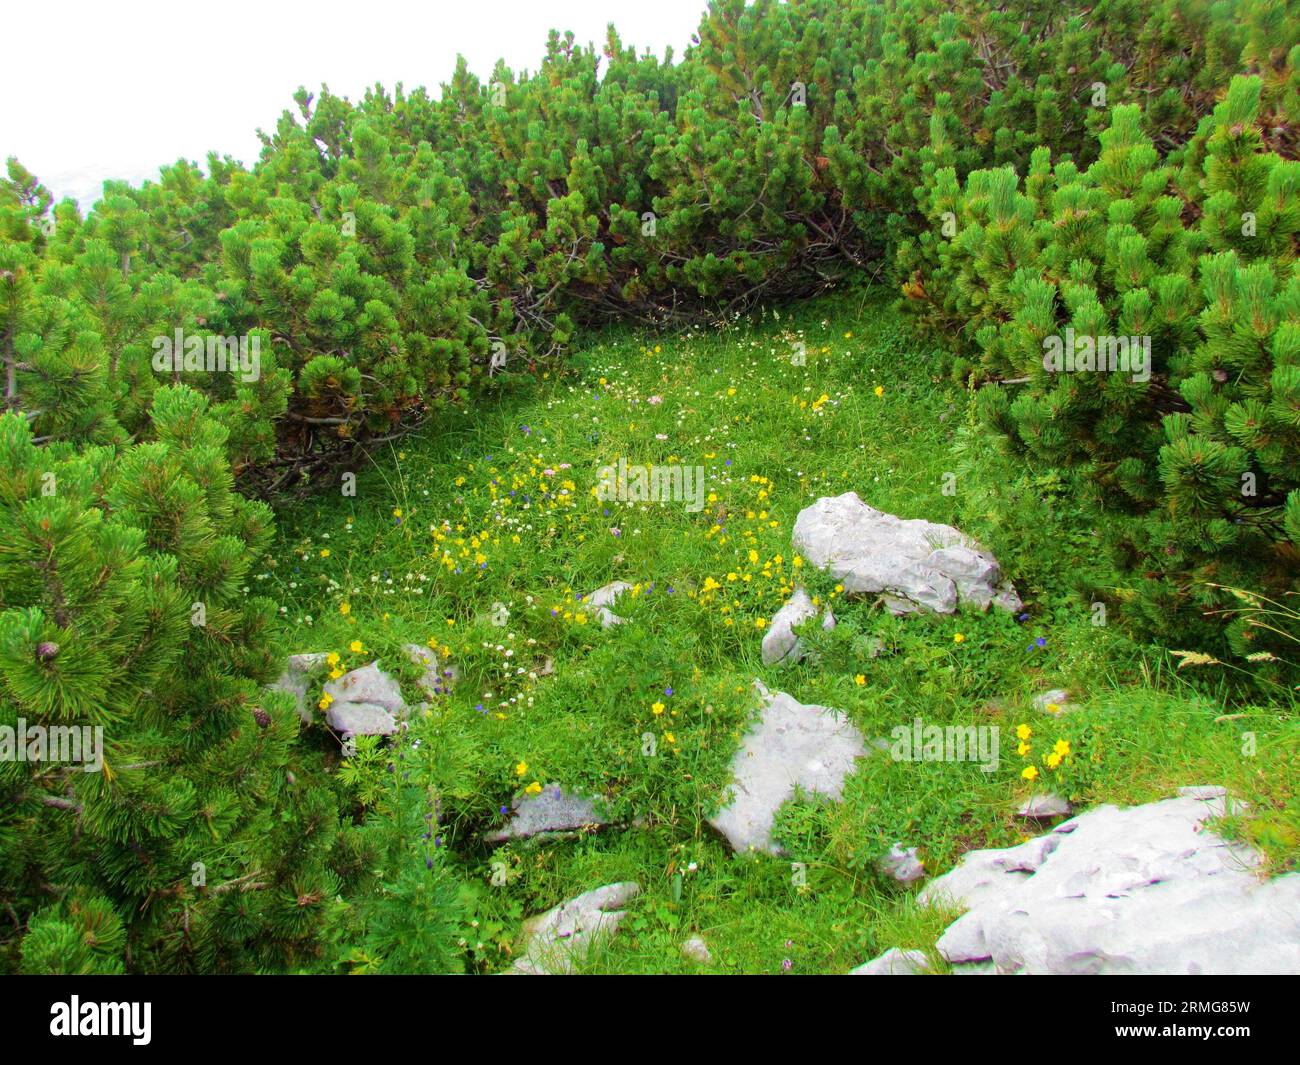 Meadow surrounded by creeping pine (Pinus mugo) with some rocks full of yellow blooming alpine rock rose (Helianthemum alpestre) Stock Photo